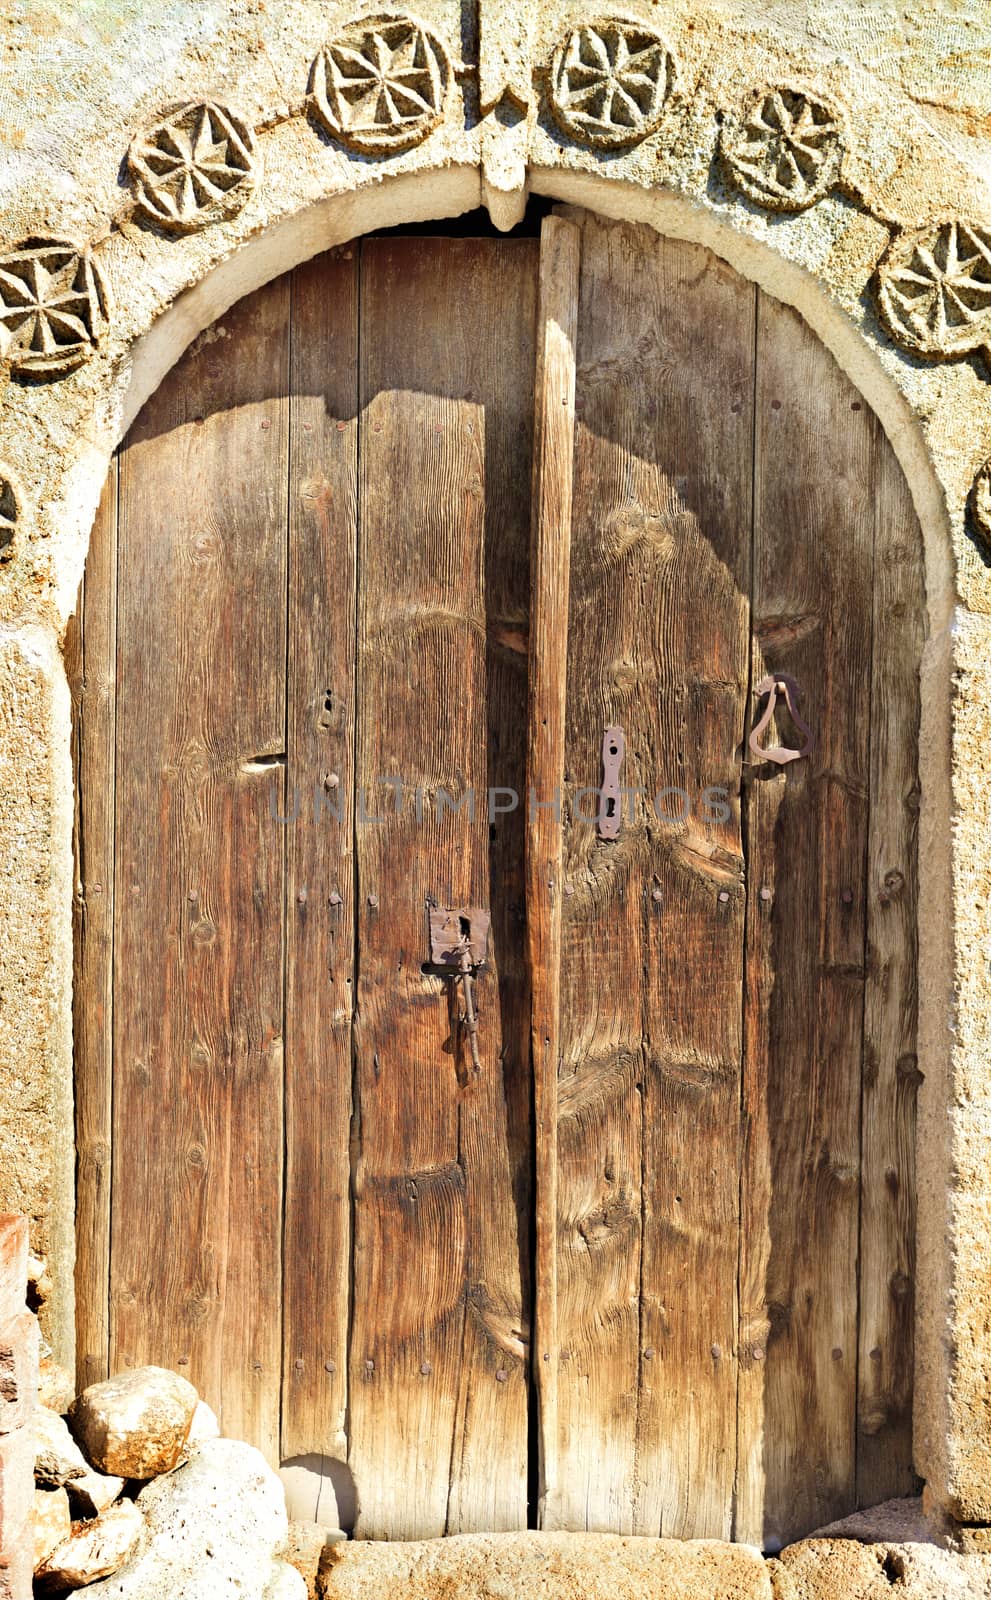 Very old weathered arched antique wooden doors with a stone pattern and metal wrought-iron lock.